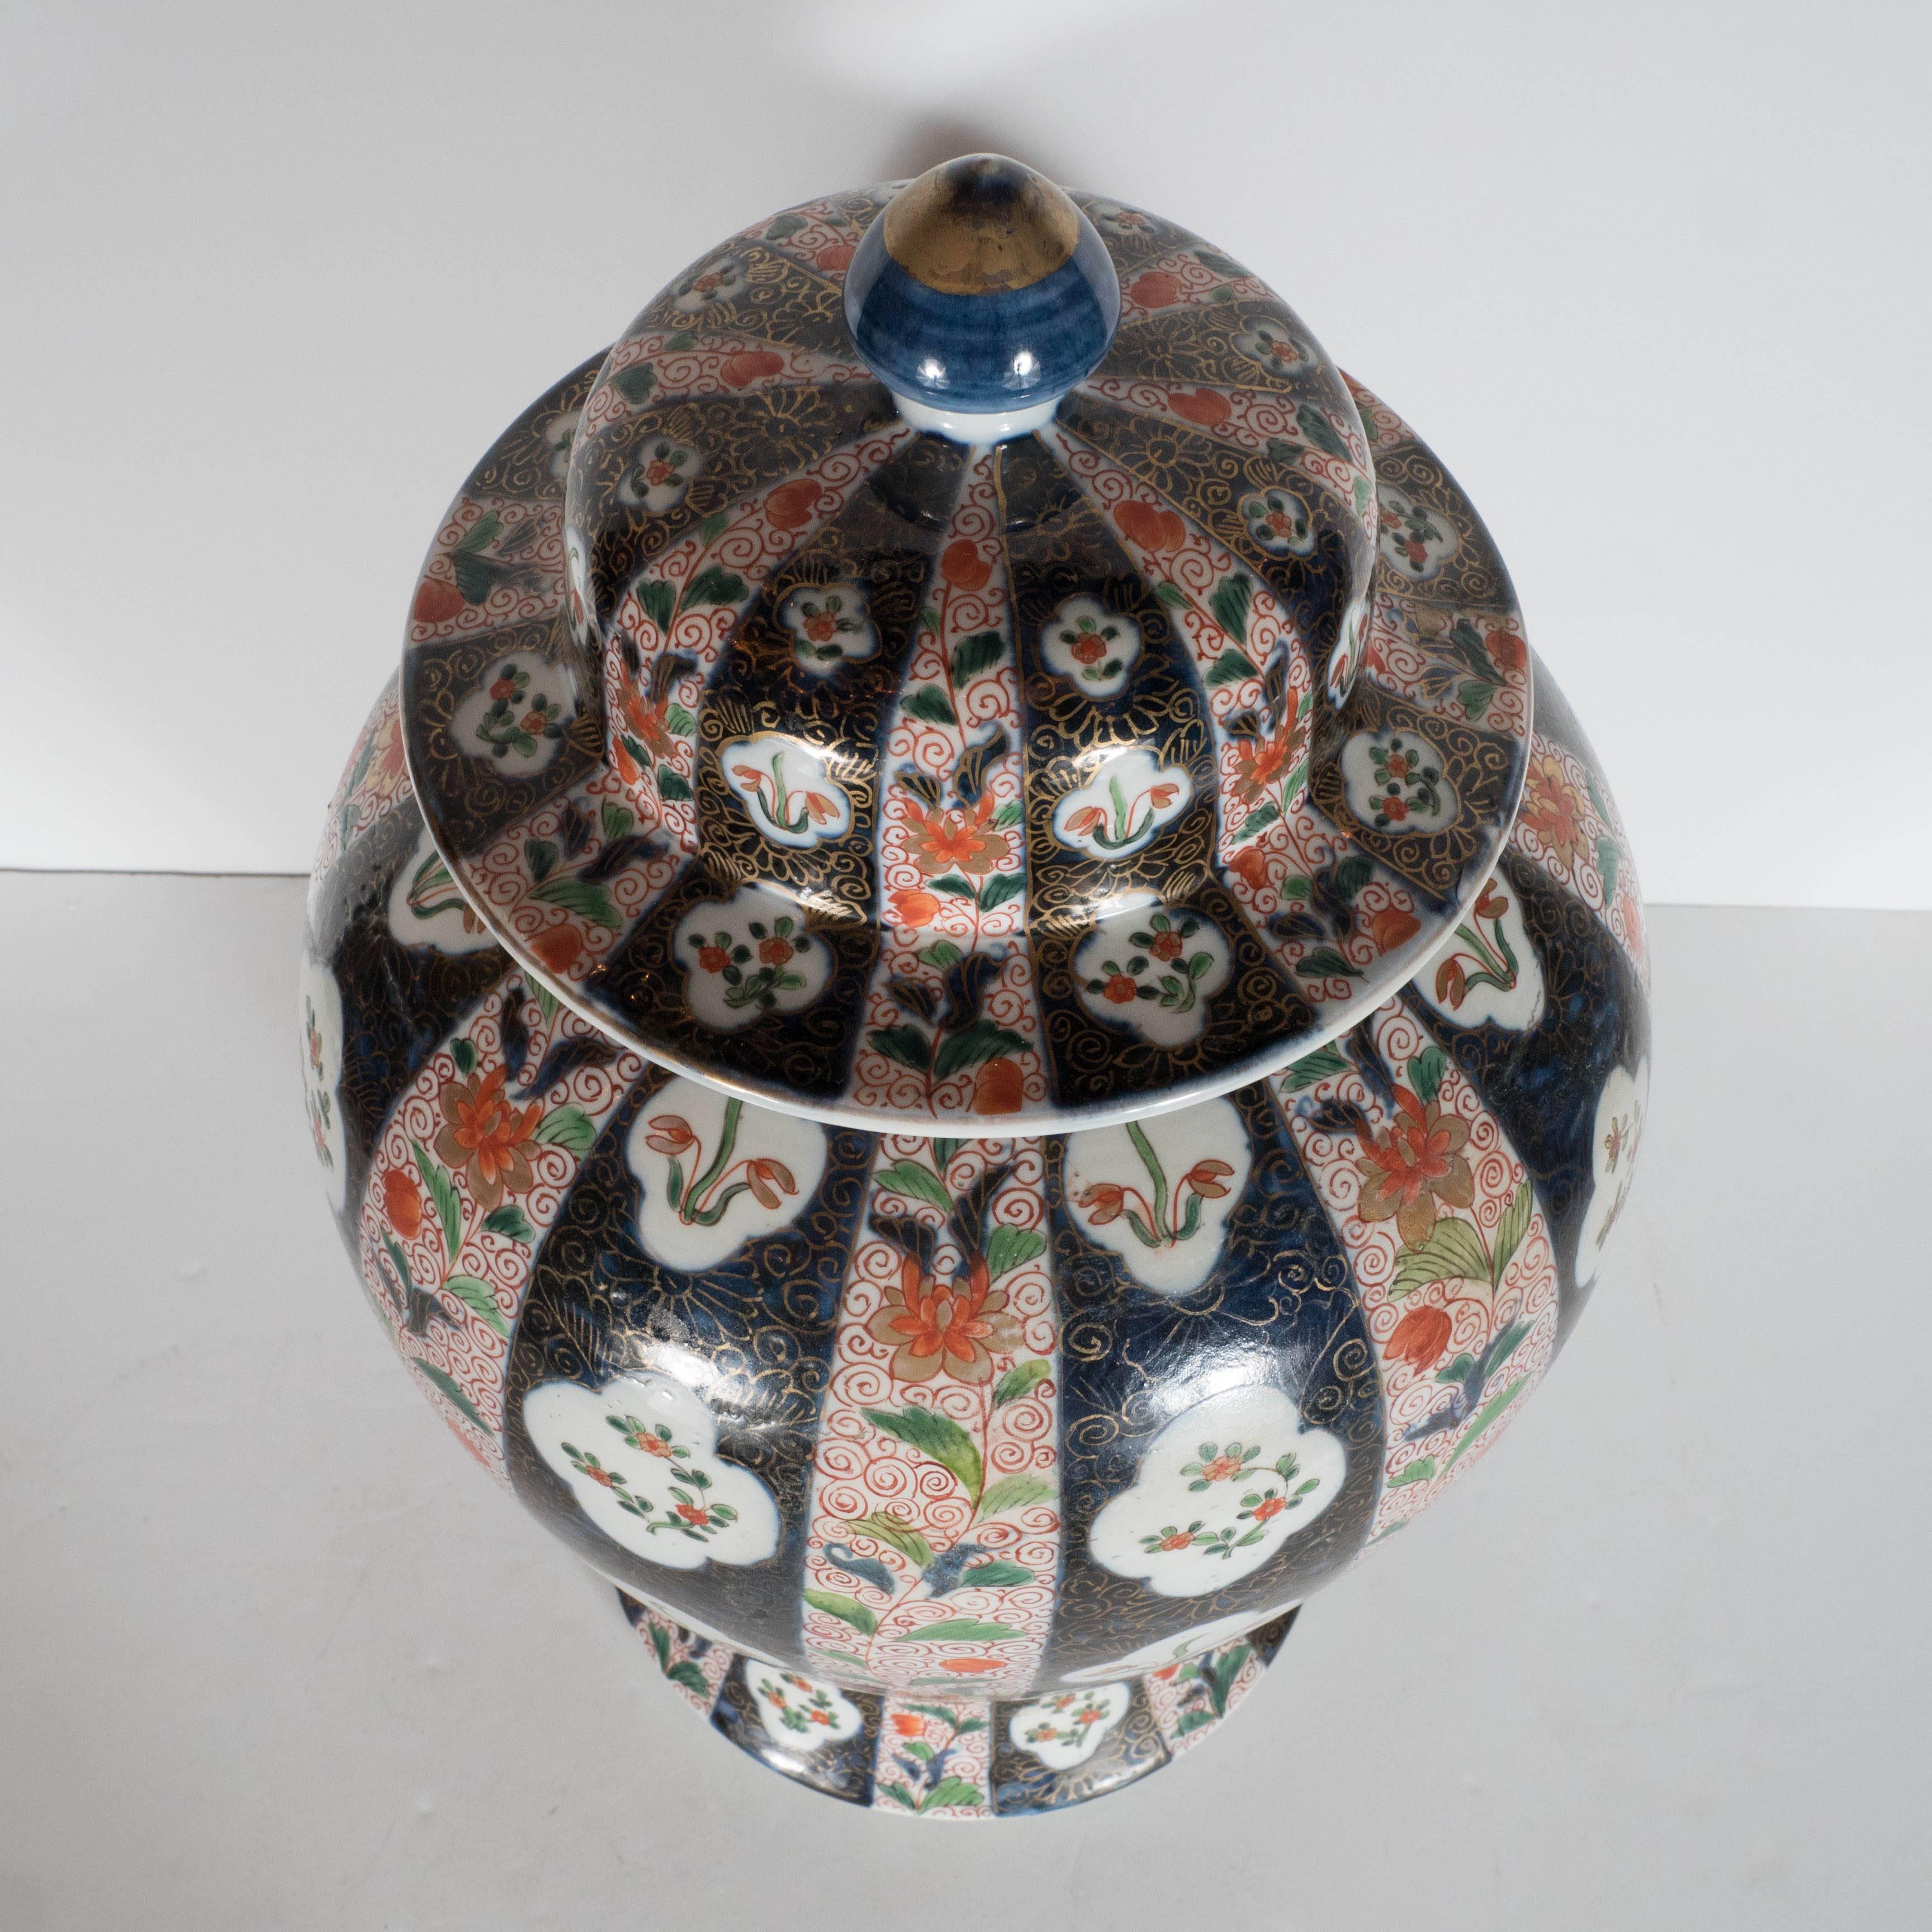 Chinese Export Large-Scale Antique Chinese Porcelain Famille Verte Lidded Vases / Urns